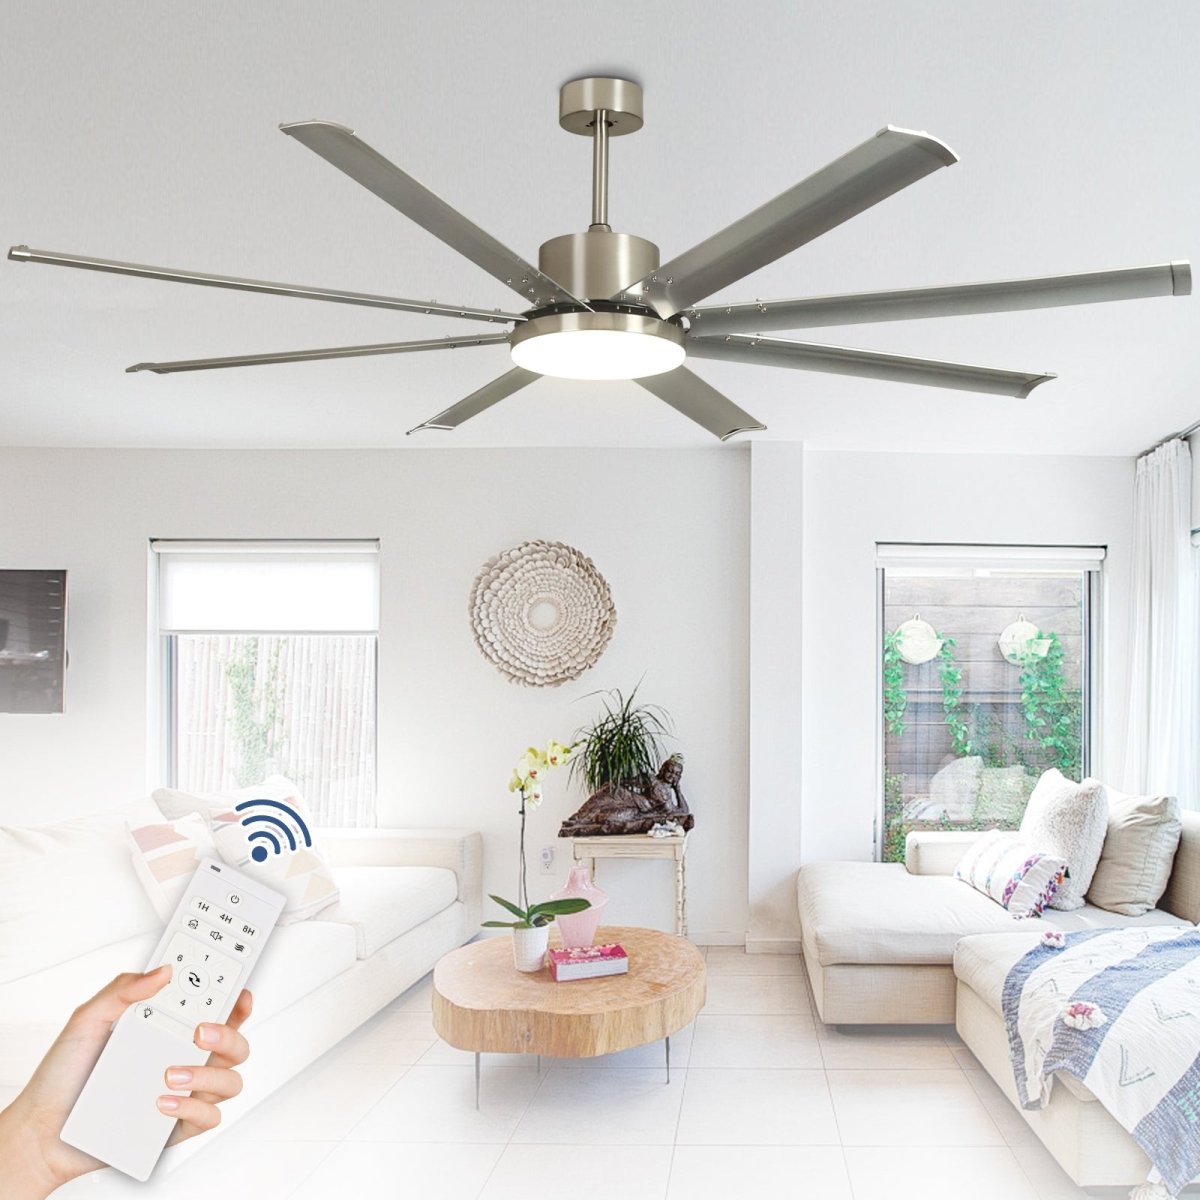 80" Ceiling Fans with Lights and Remote, 8 Aluminum Blades Sand Nickel & Silver Ceiling Fans, 6-Speed DC Motor, Farmhouse Ceiling Fan with Light for Kitchen Living Room Bedroom Farmhouse - WS-FPZ58-24C-8-NS 1 | DEPULEY